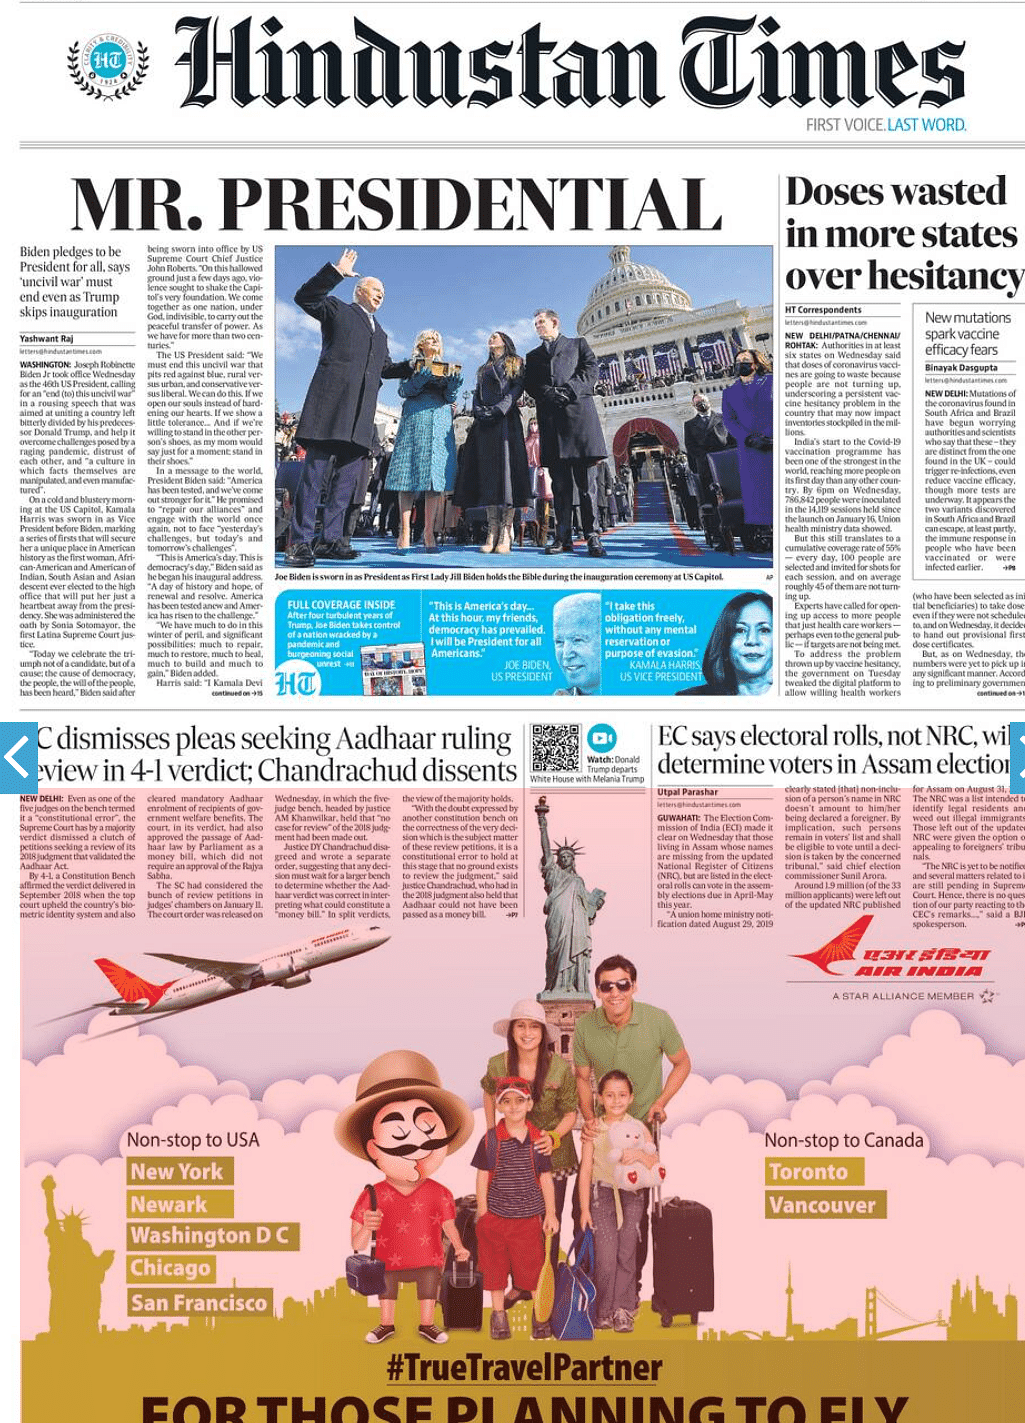 Here is a look at how major newspapers across the world and at home reported President Biden’s inauguration.